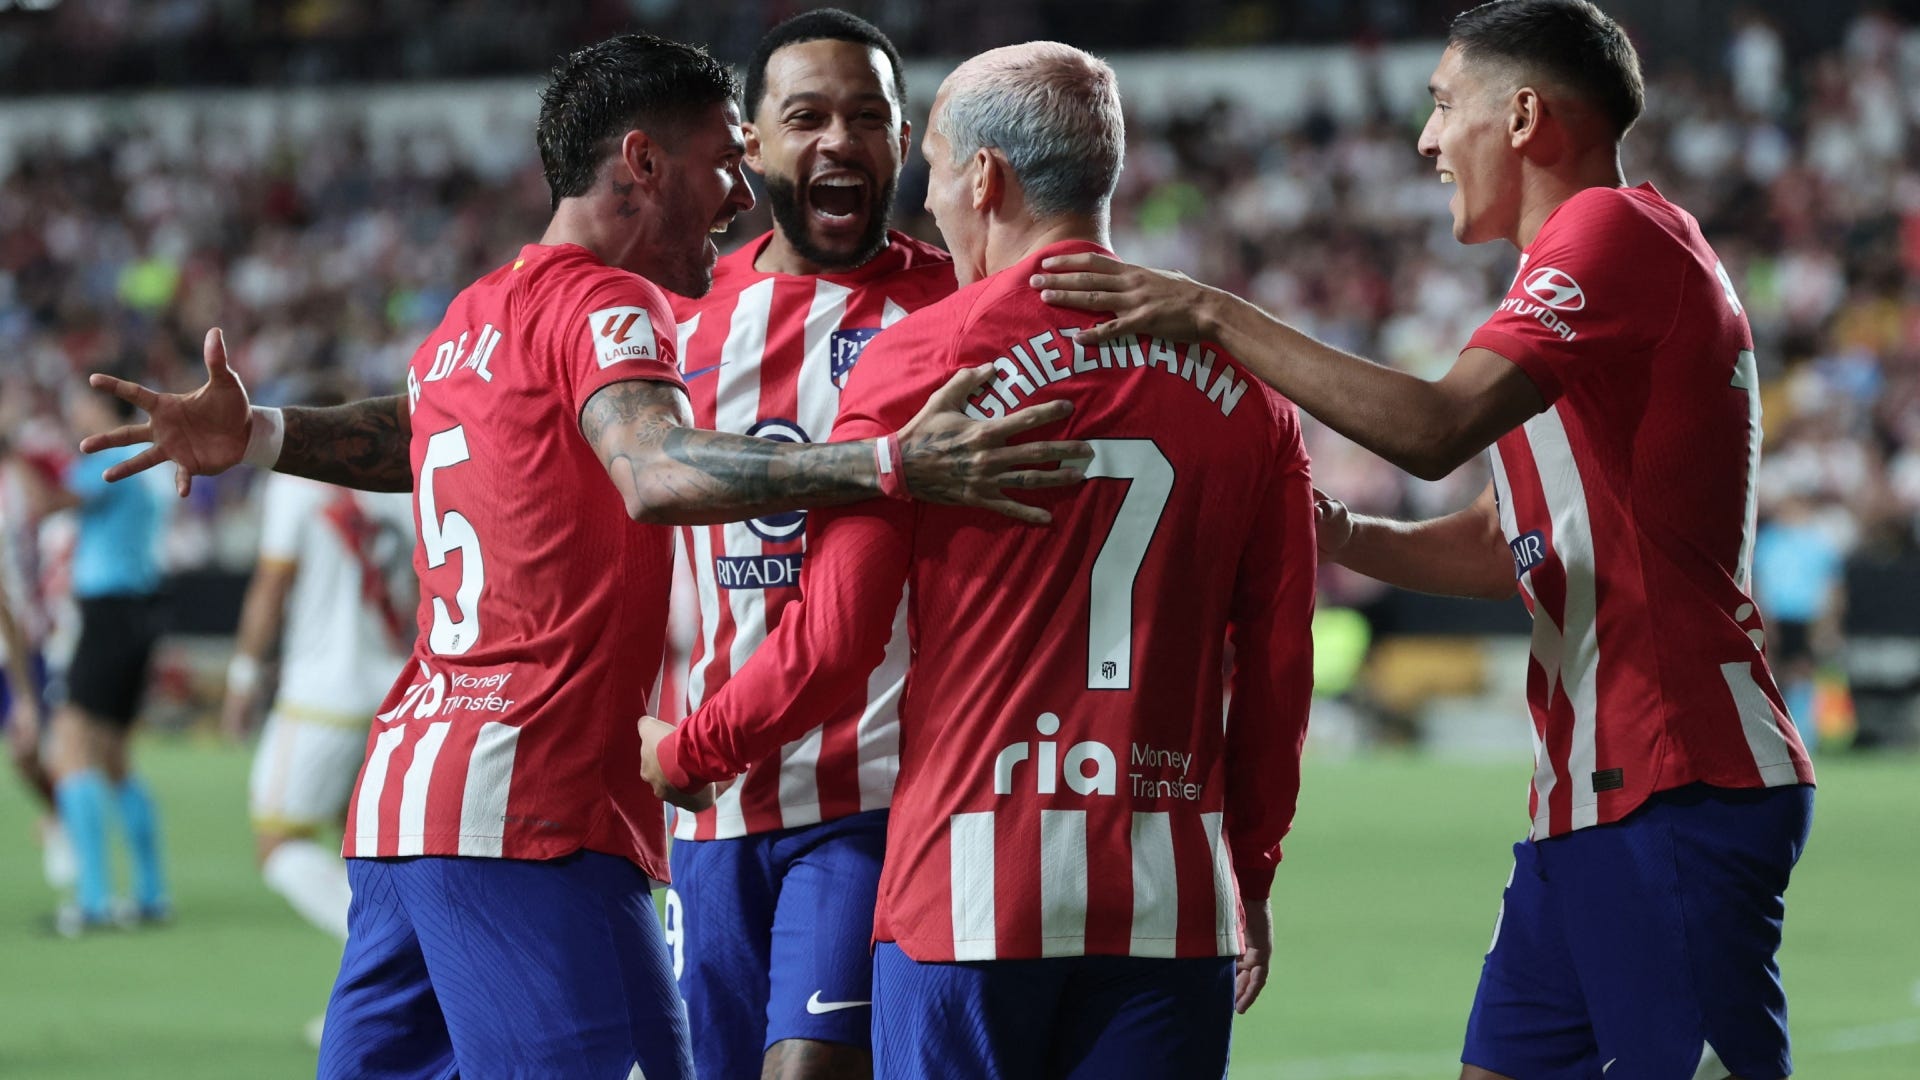 Atlético vs Sevilla Where to watch the match online, live stream, TV channels, and kick-off time Goal US